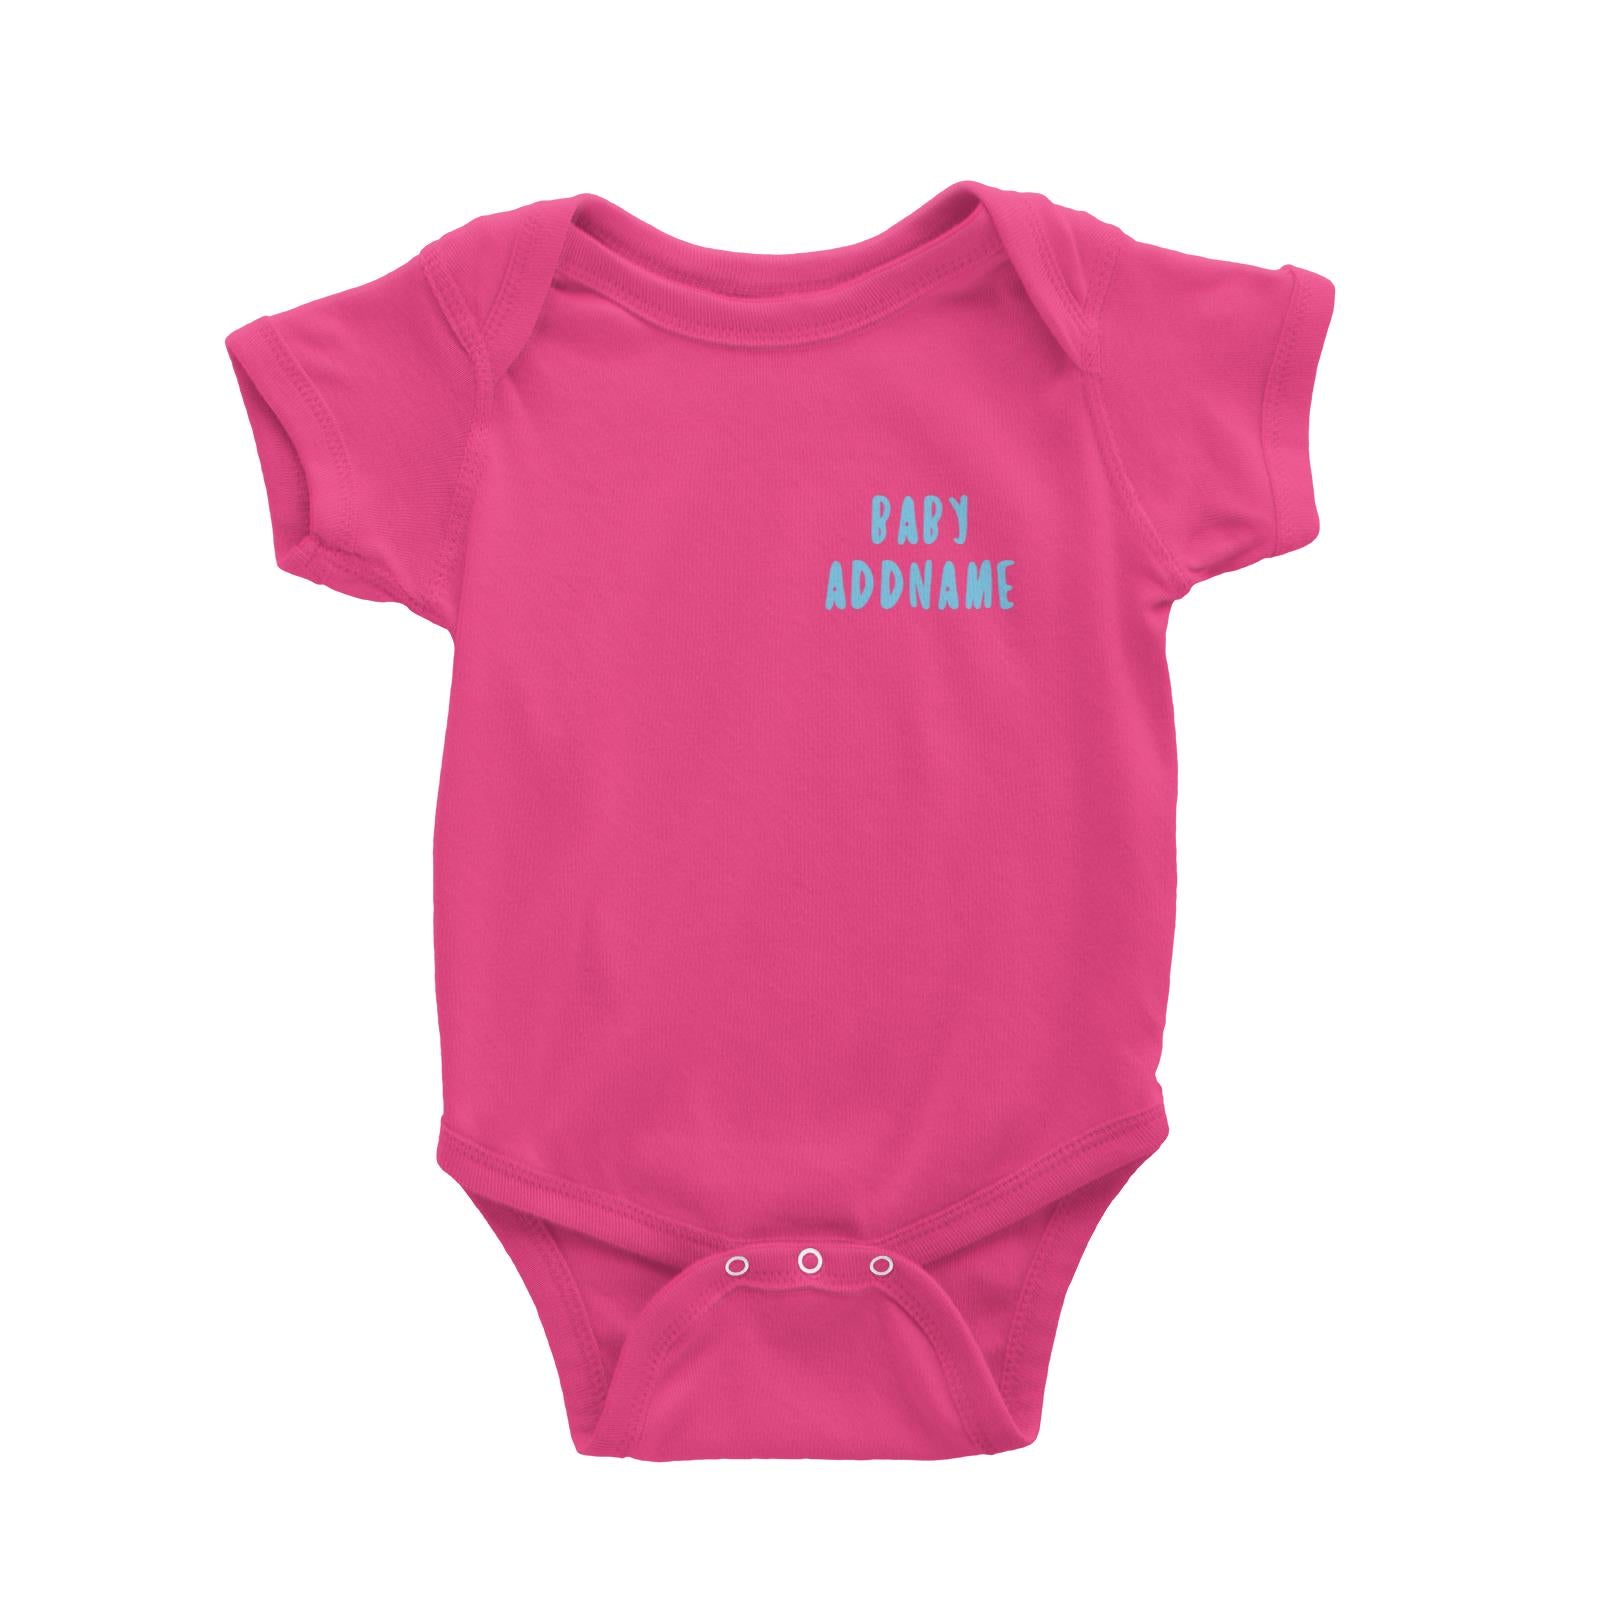 Baby Addname Logo in Blue Baby Romper Personalizable Designs Basic Newborn